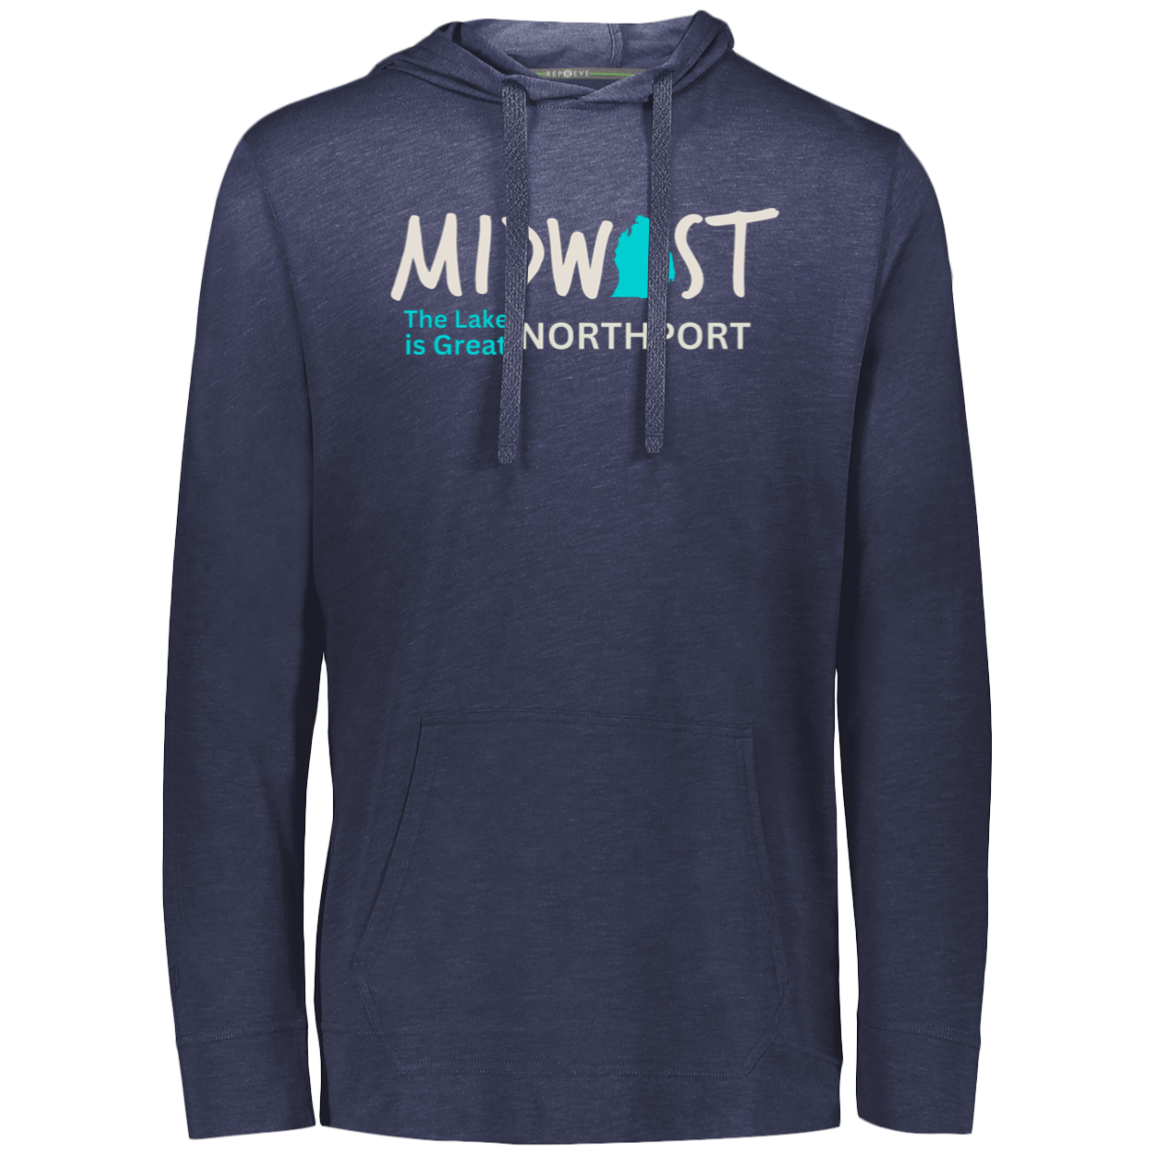 Midwest The Lake is Great Northport Eco Lightweight Hoodie